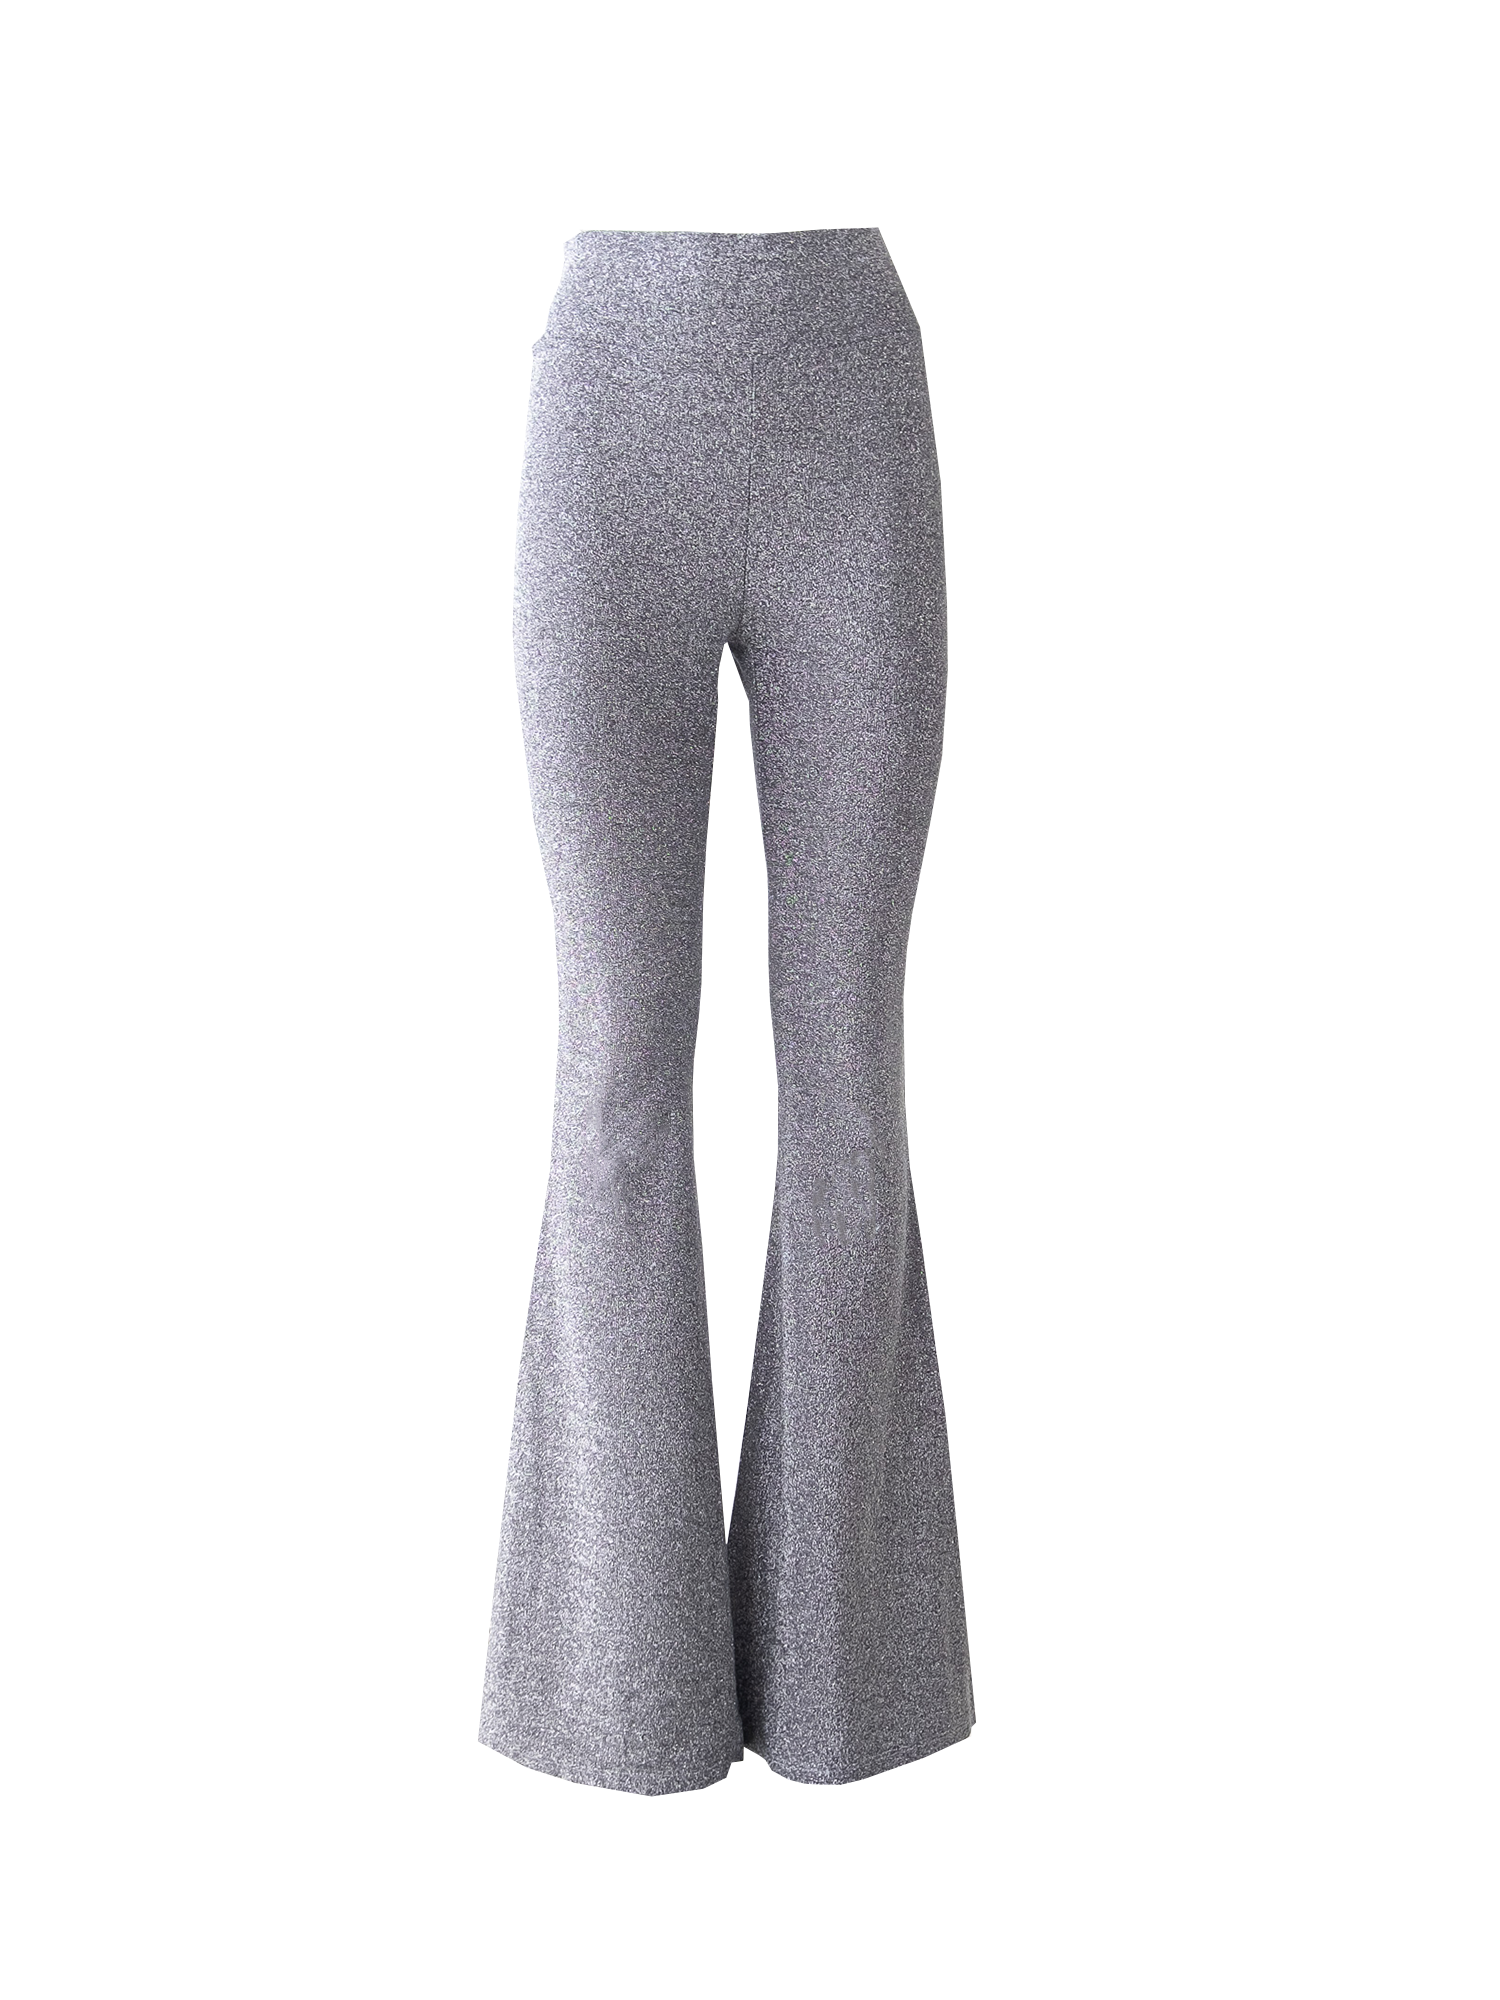 LOLA - flared trouser with high waist in silver lurex